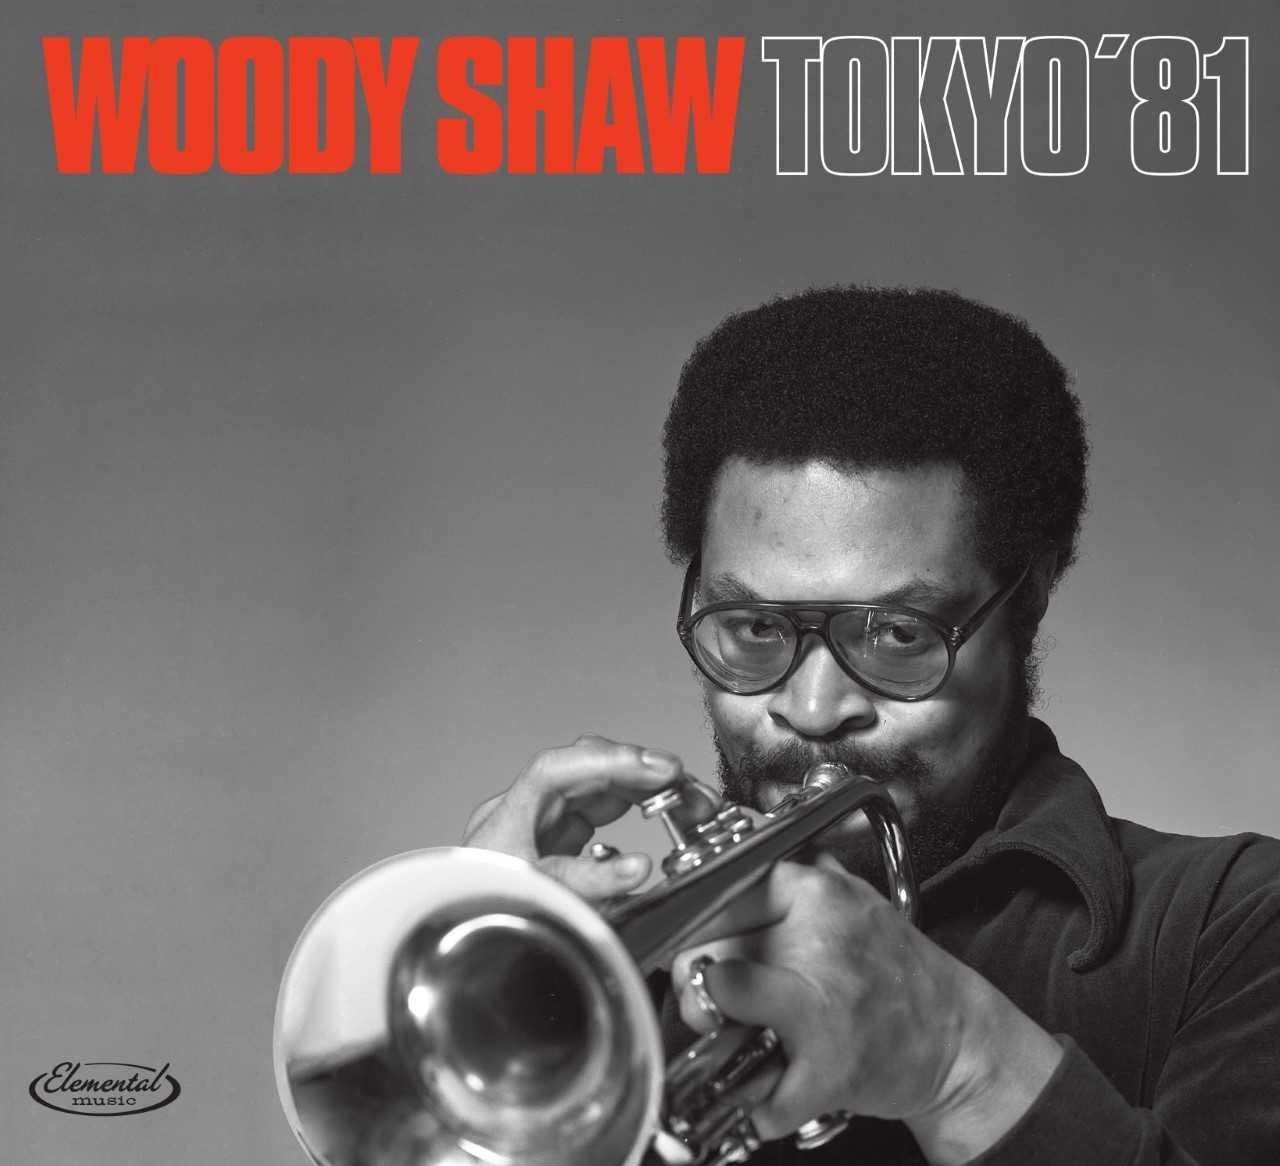 WOODY SHAW - Tokyo'81 cover 